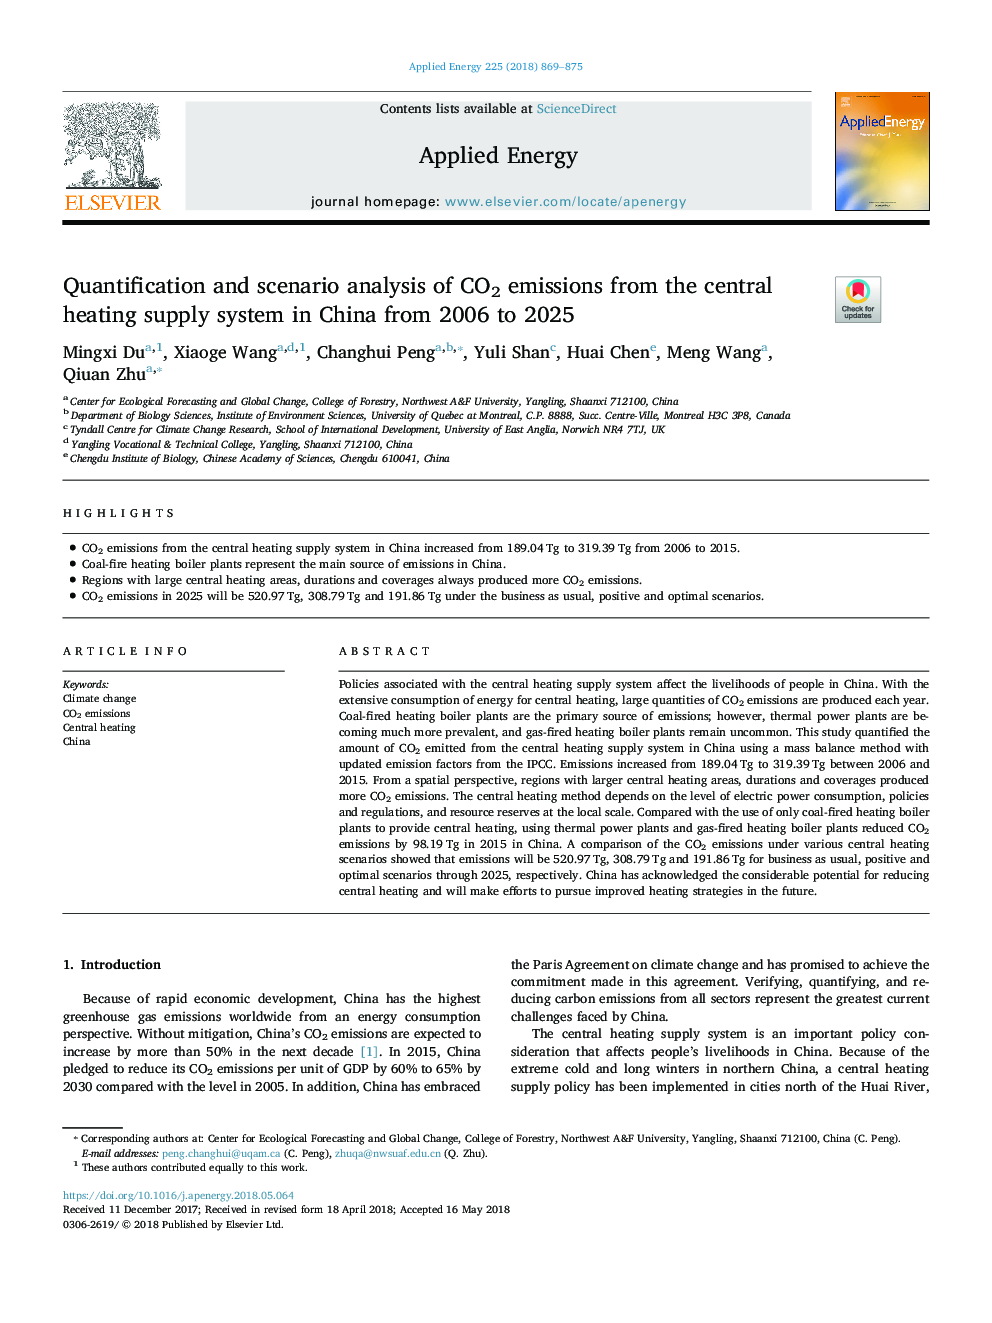 Quantification and scenario analysis of CO2 emissions from the central heating supply system in China from 2006 to 2025